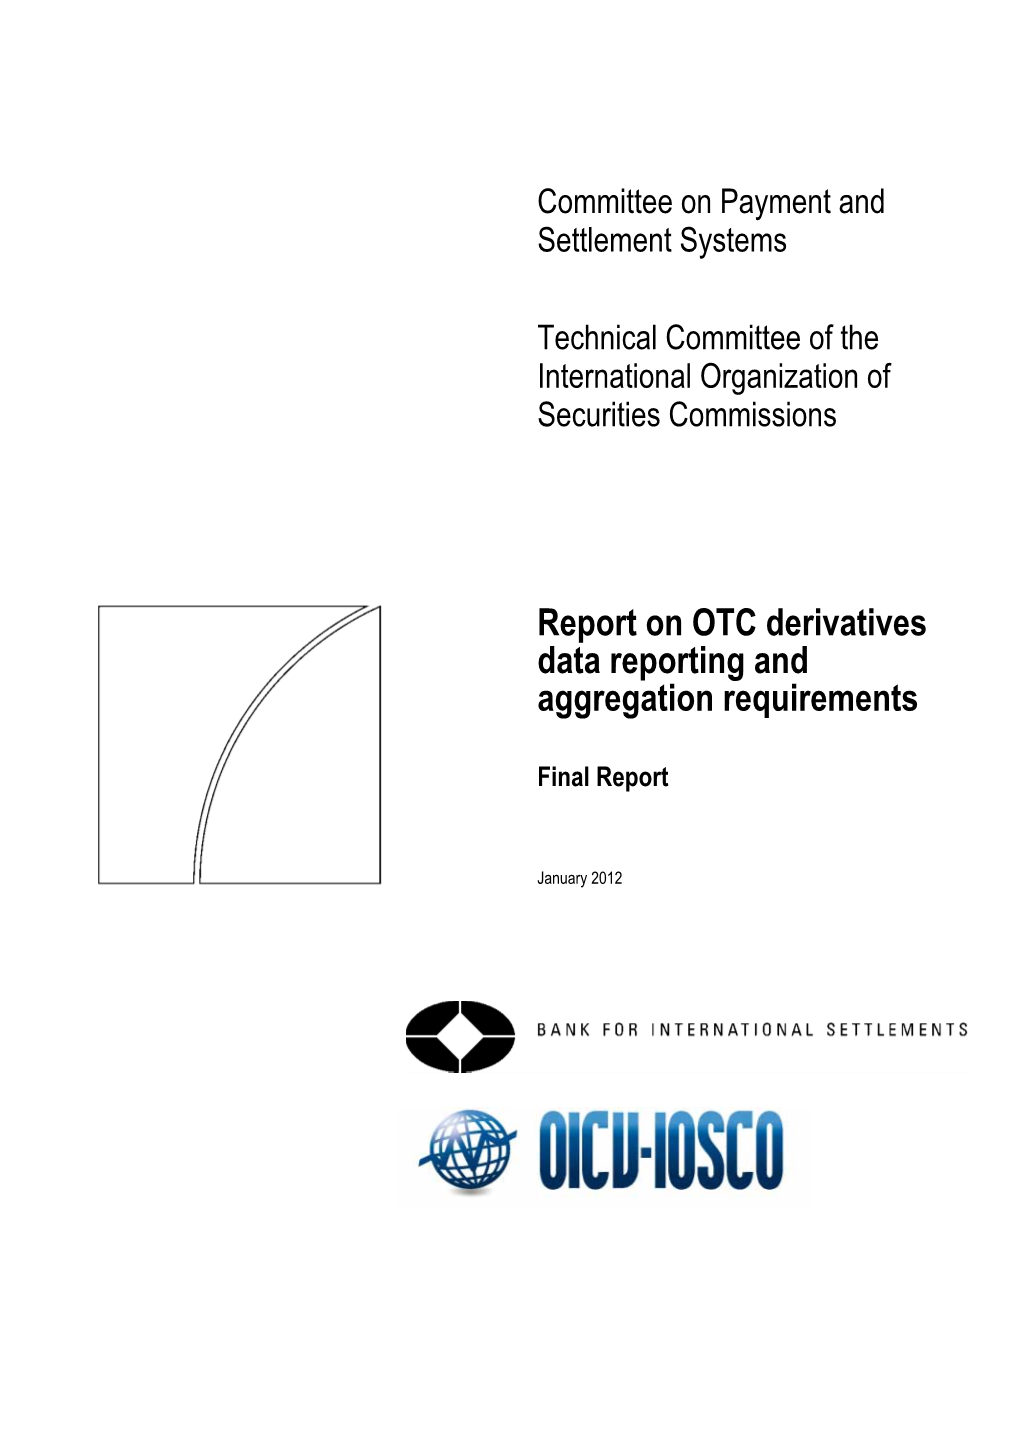 OTC Derivatives Data Reporting and Aggregation Requirements